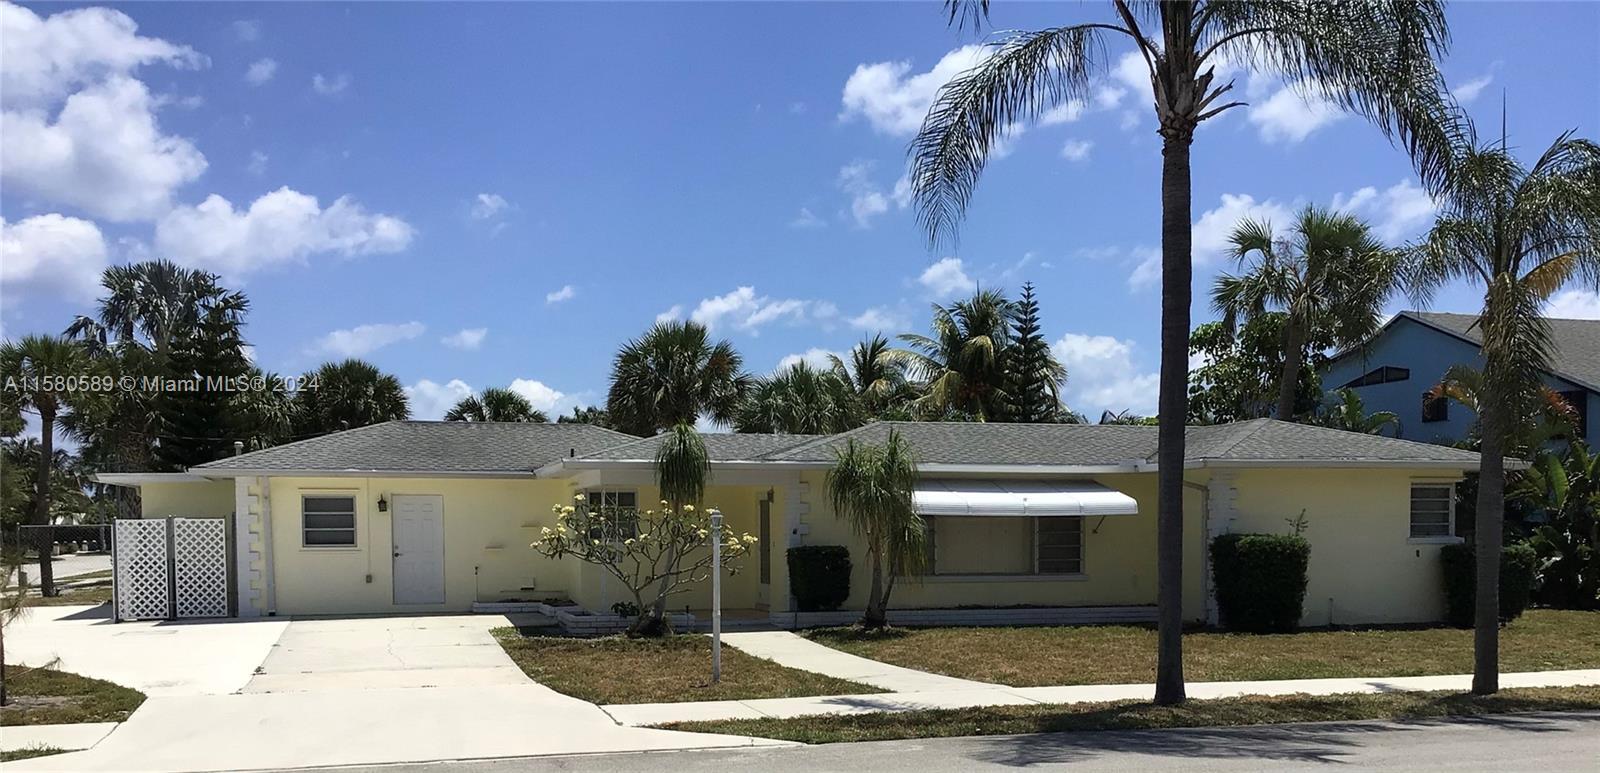 Charming 2/3 home on a corner lot in a Centrally located Lake Worth College Point Neighborhood. Idea